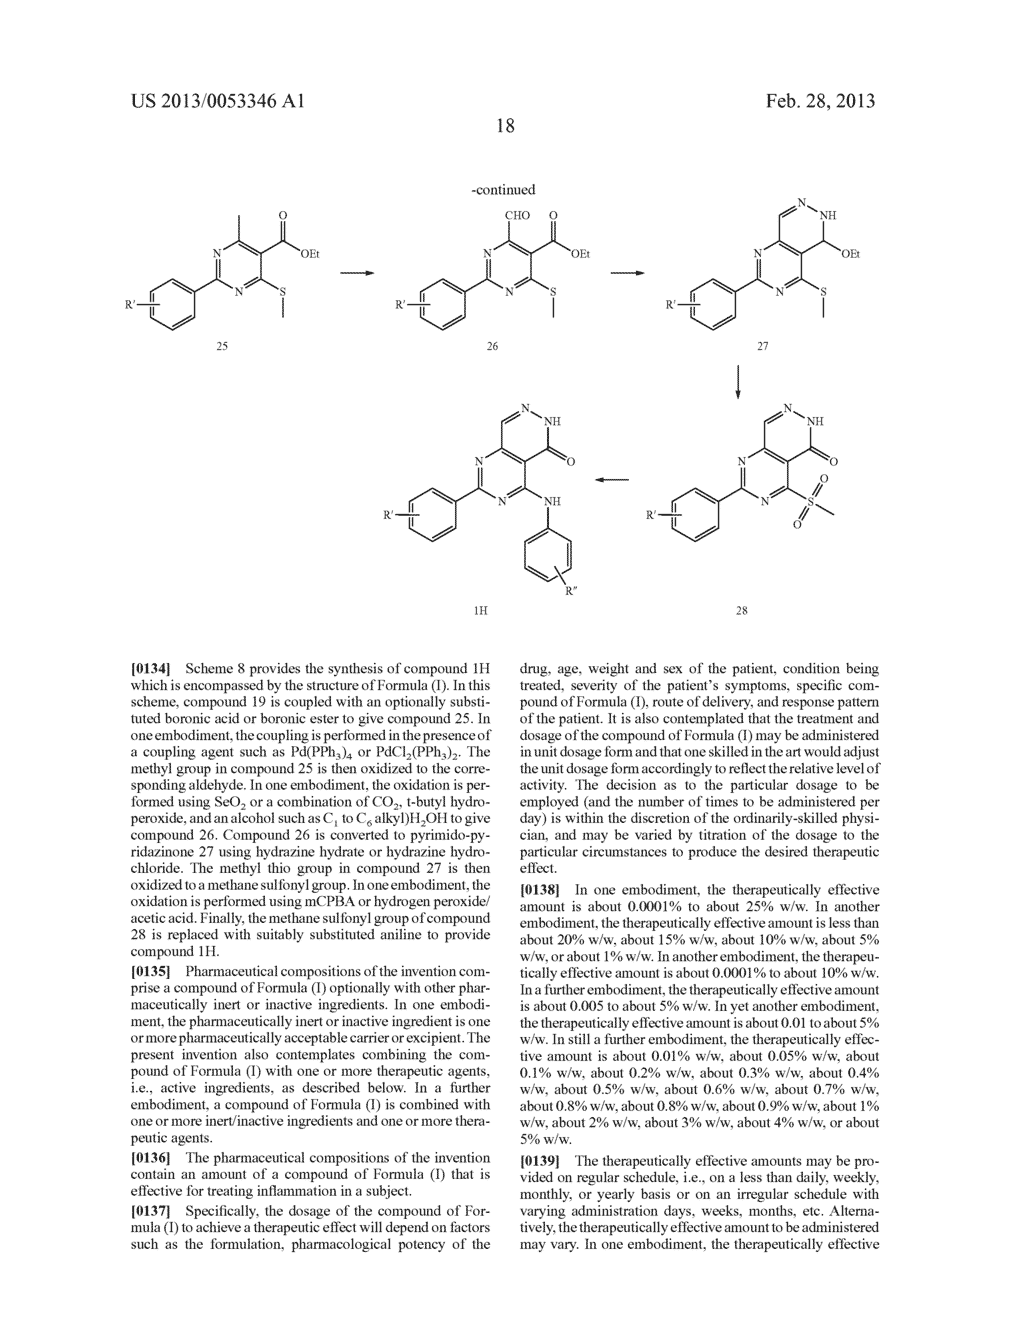 PYRIMIDO-PYRIDAZINONE COMPOUNDS AND METHODS OF USE THEREOF - diagram, schematic, and image 22